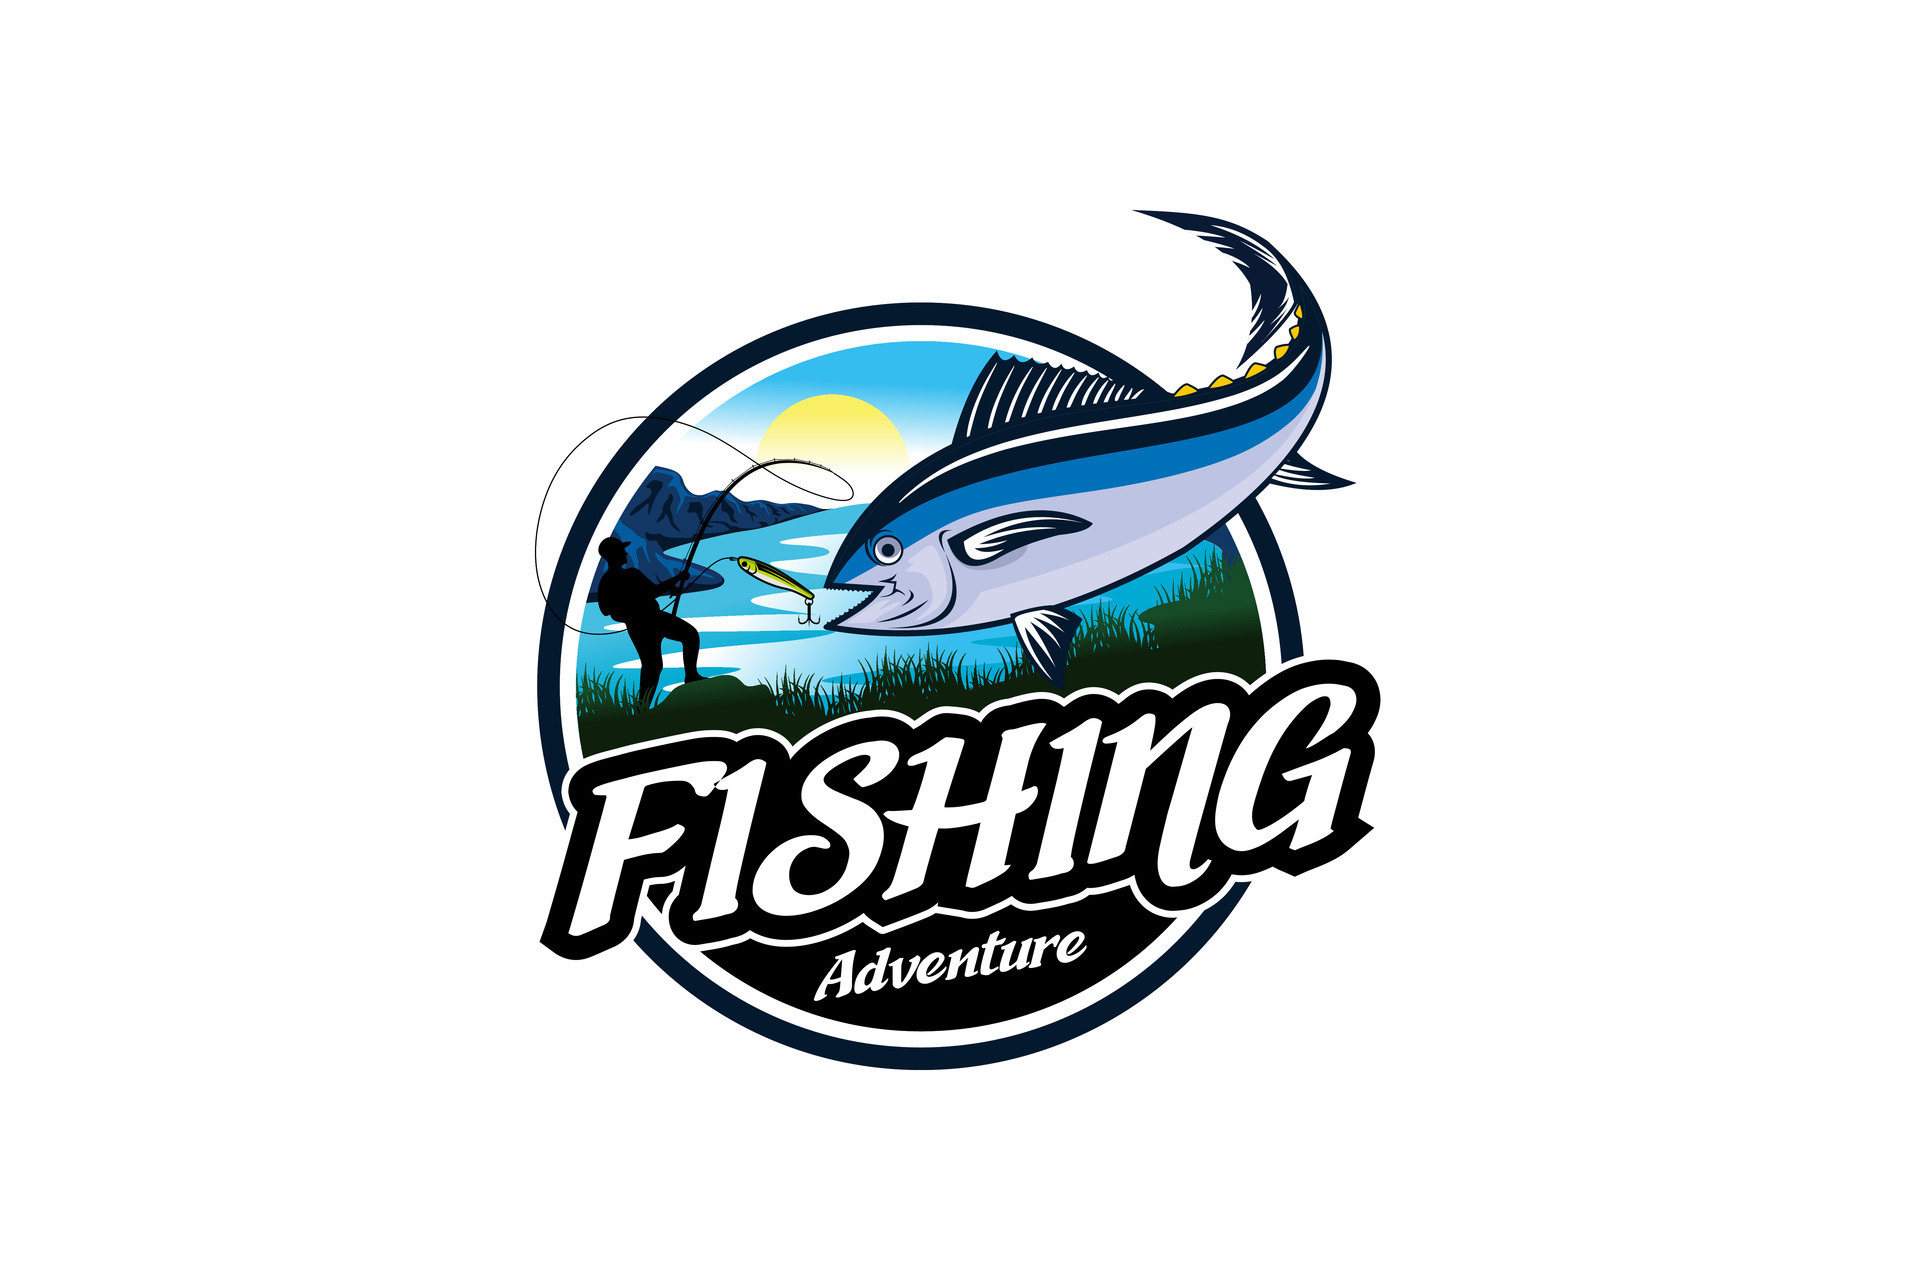 https://static.vecteezy.com/system/resources/previews/024/814/087/original/tuna-fishing-logo-sticker-design-with-sea-view-background-vector.jpg